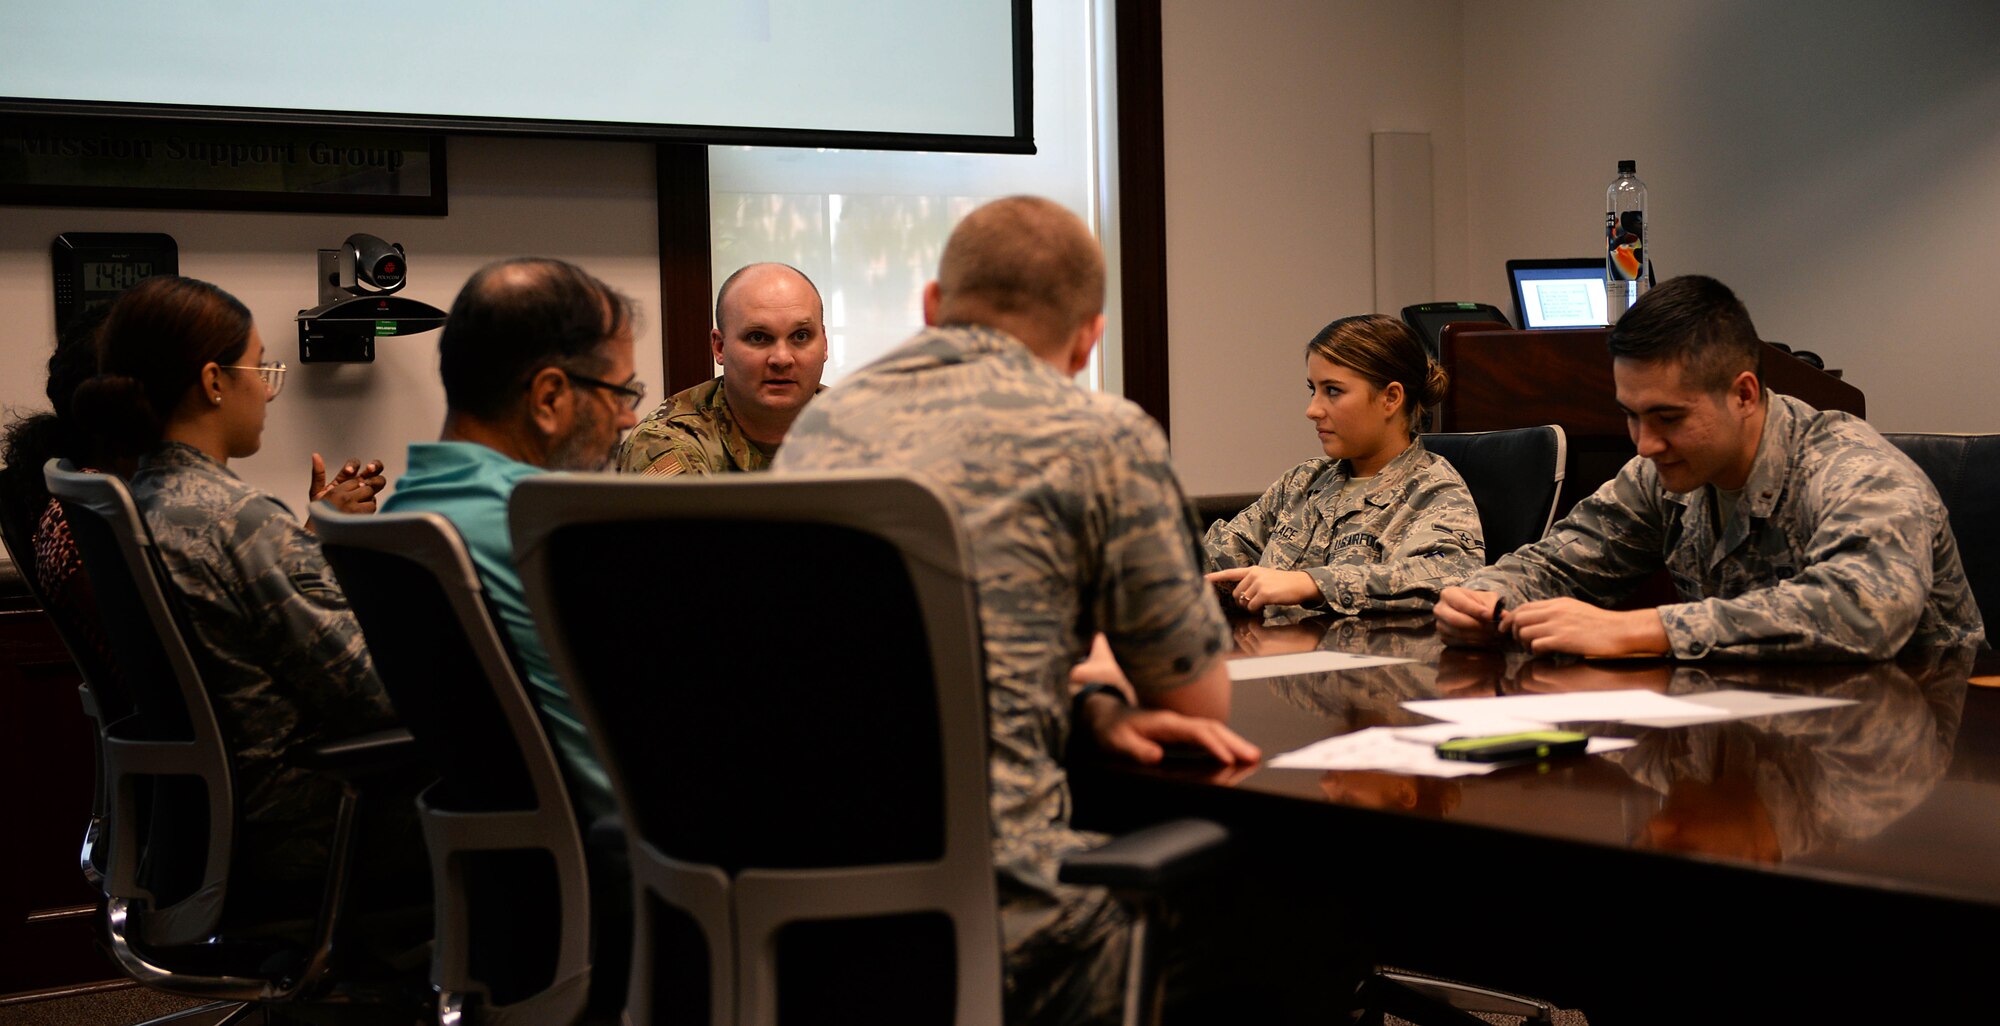 Members from the 14th Comptroller Squadron discuss various questions during a Tactical Pause Aug. 22, 2019, on Columbus Air Force Base, Miss. On Aug. 1 Chief of Staff Gen. David L. Goldfein ordered all wings to stand down for a day and focus on resiliency and suicide prevention. (U.S. Air Force photo by Airman 1st Class Hannah Bean)